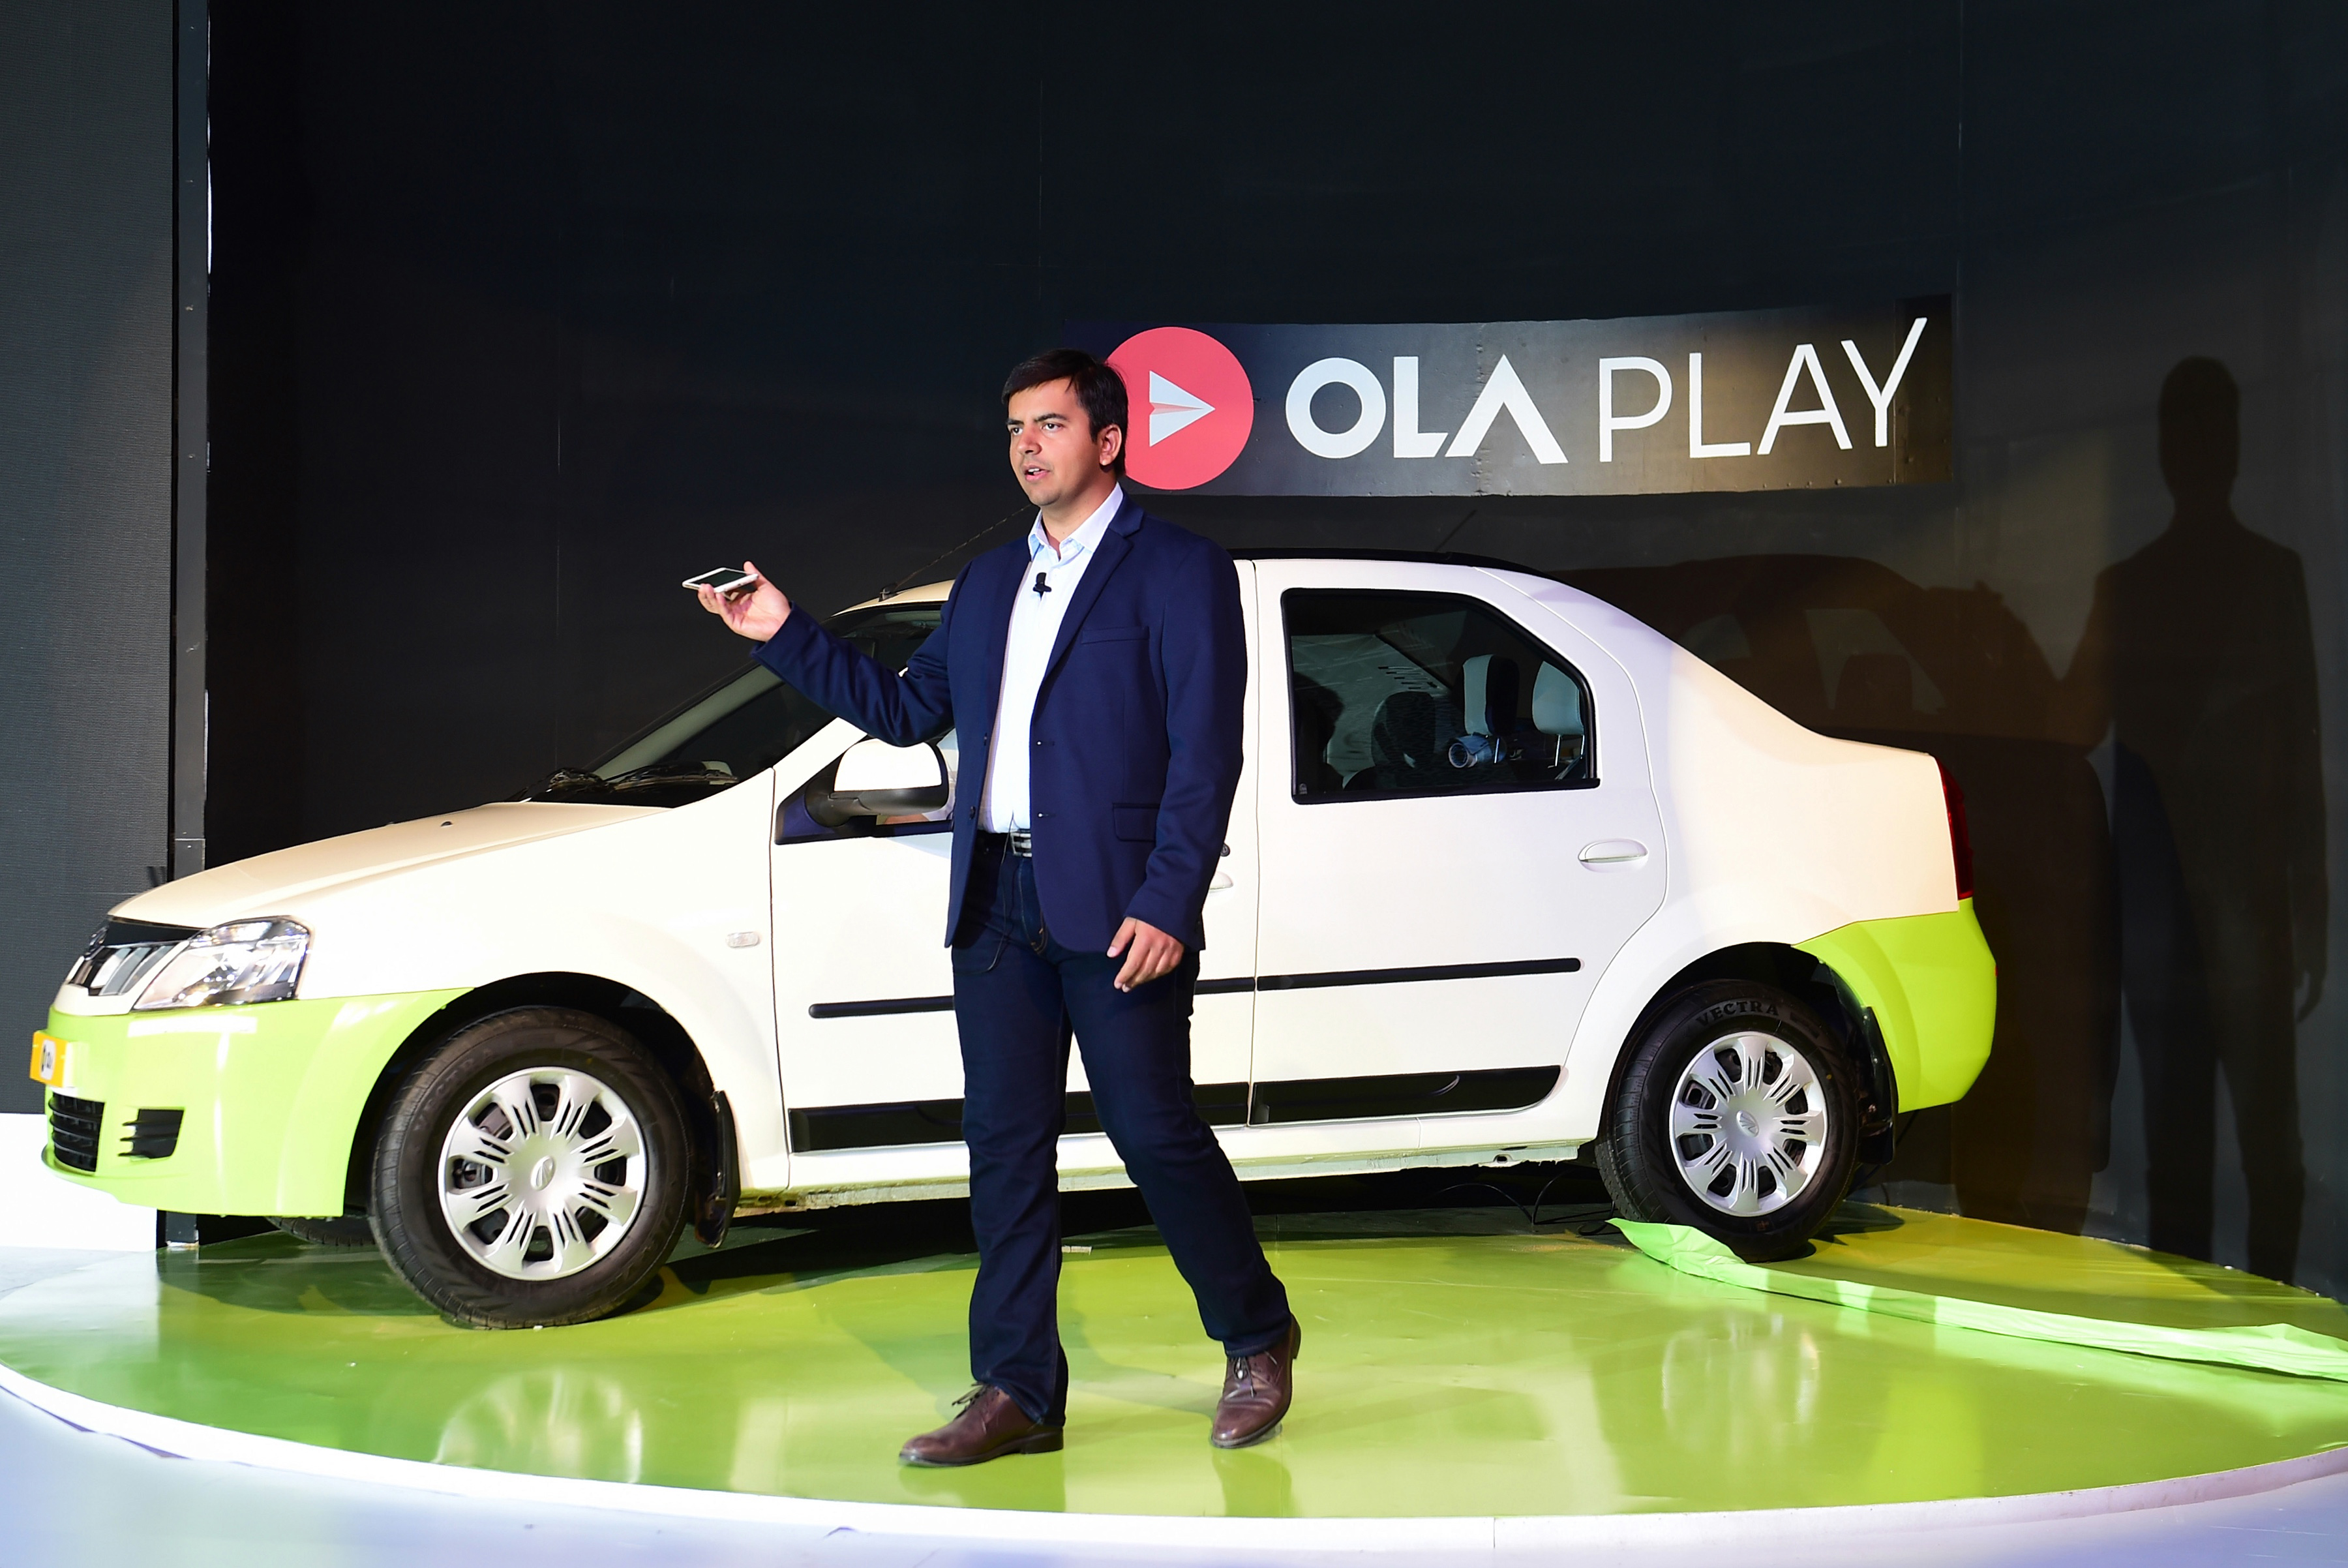 Indian Ola app co-founder and CEO Bhavish Aggarwal stands onstage in front of a car and addresses an audience